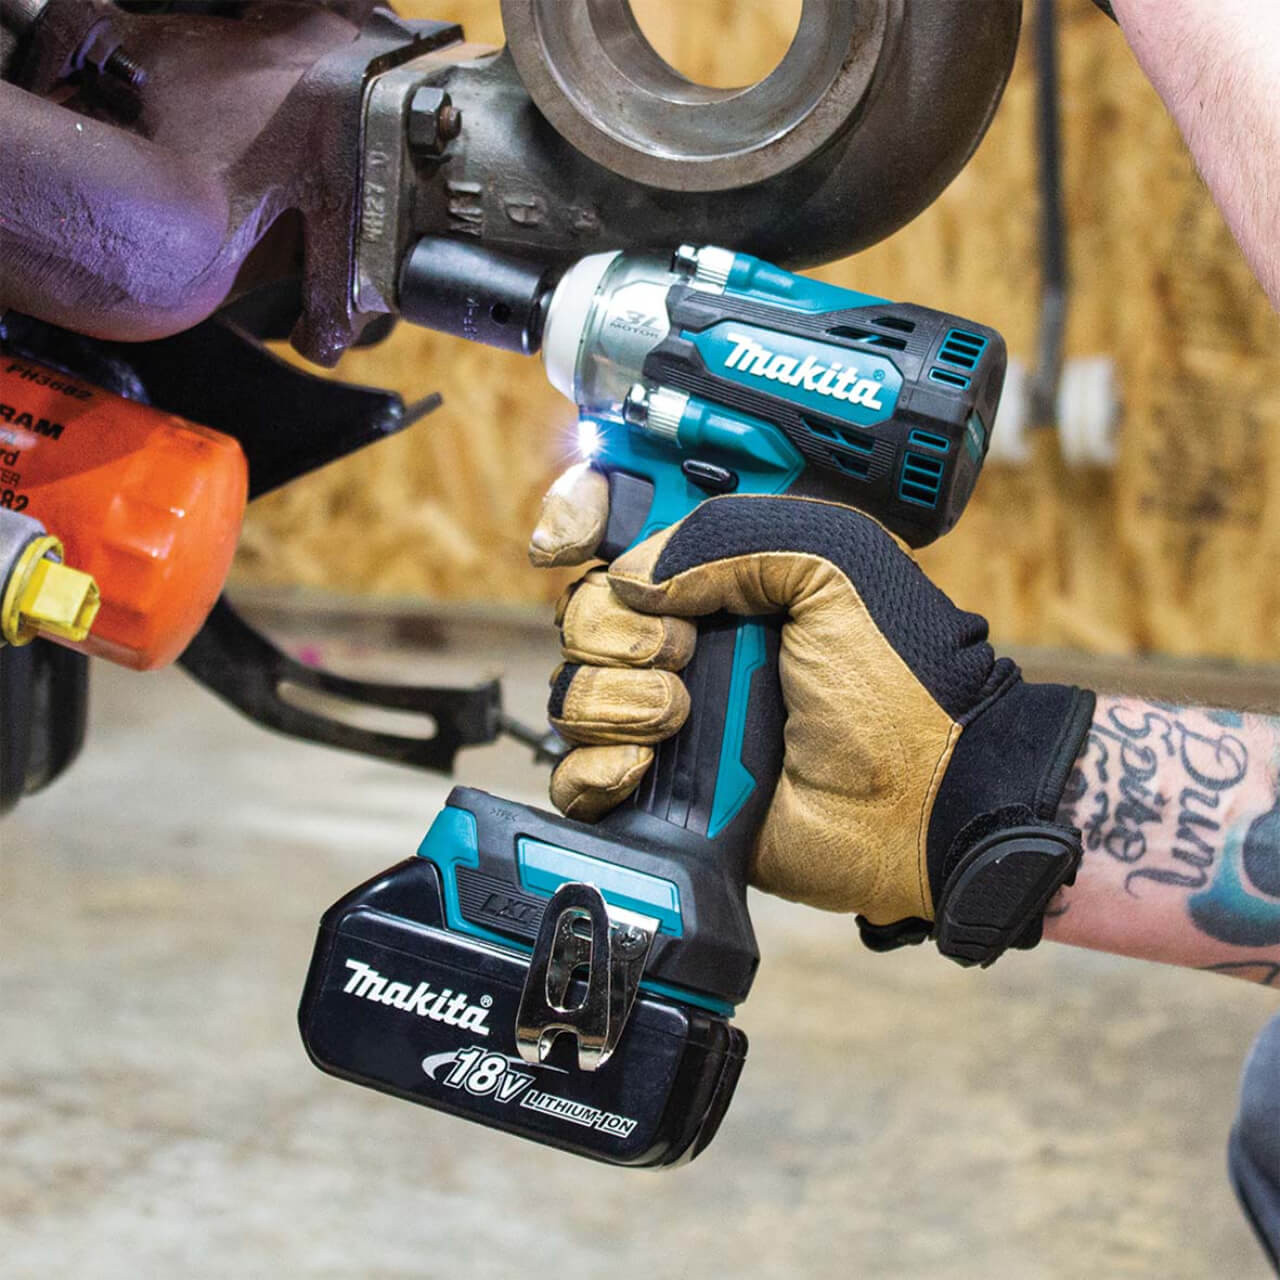 Makita 18V BRUSHLESS 1/2” Detent Pin Impact Wrench Kit - Includes 2 x 5.0Ah Batteries. Rapid Charger & Carry Case